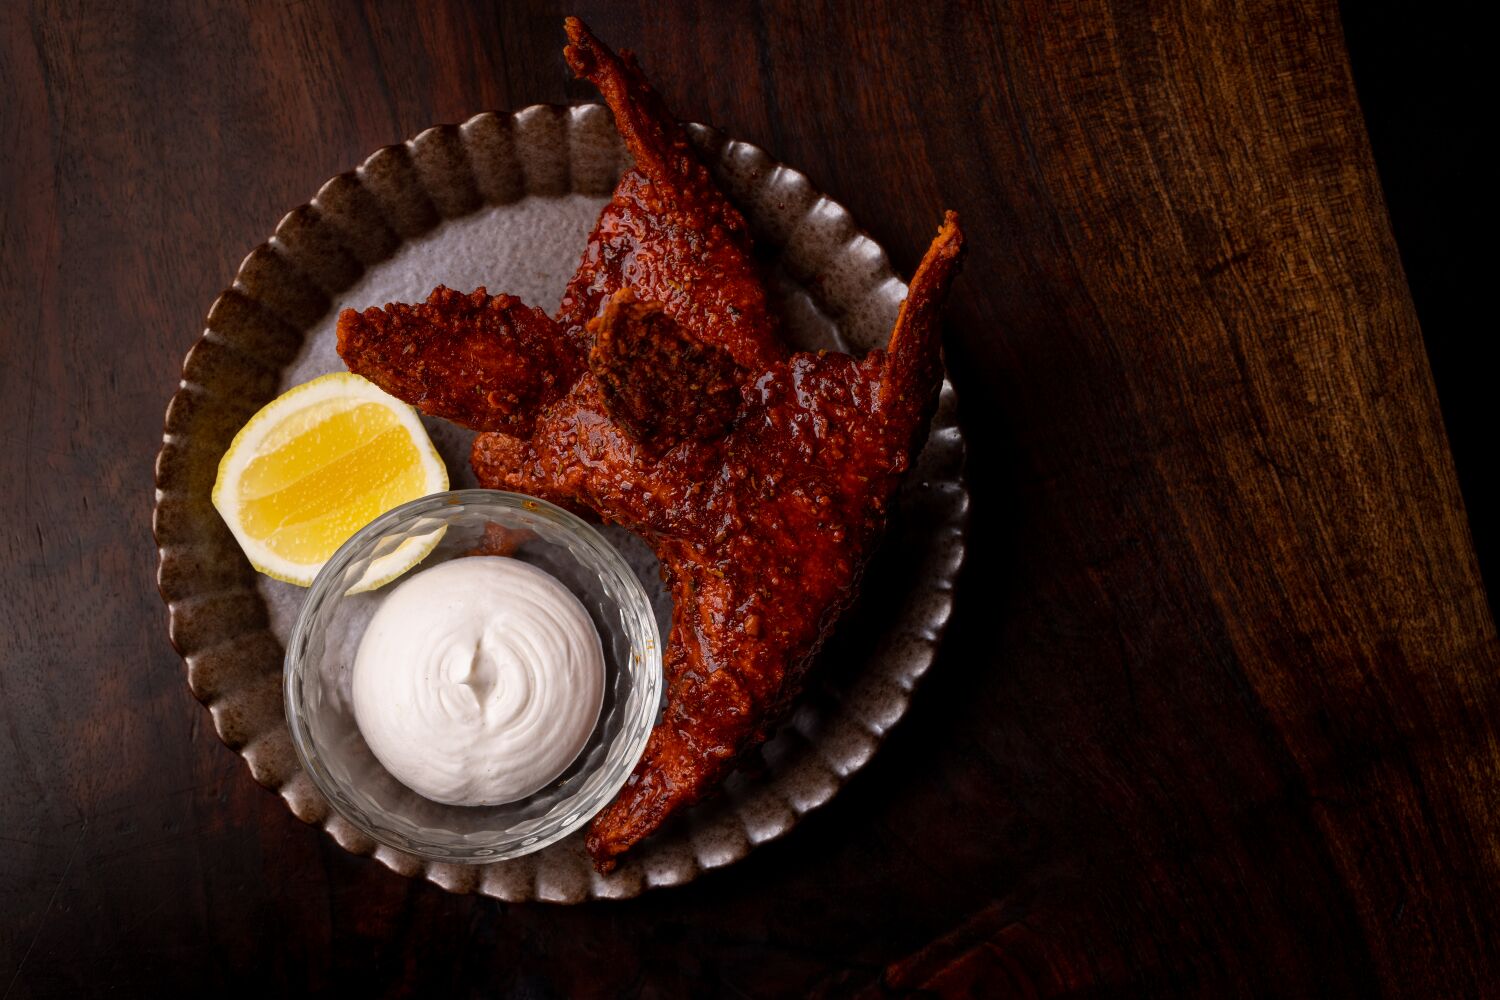 Have you heard of hot fish? It's the new hot chicken